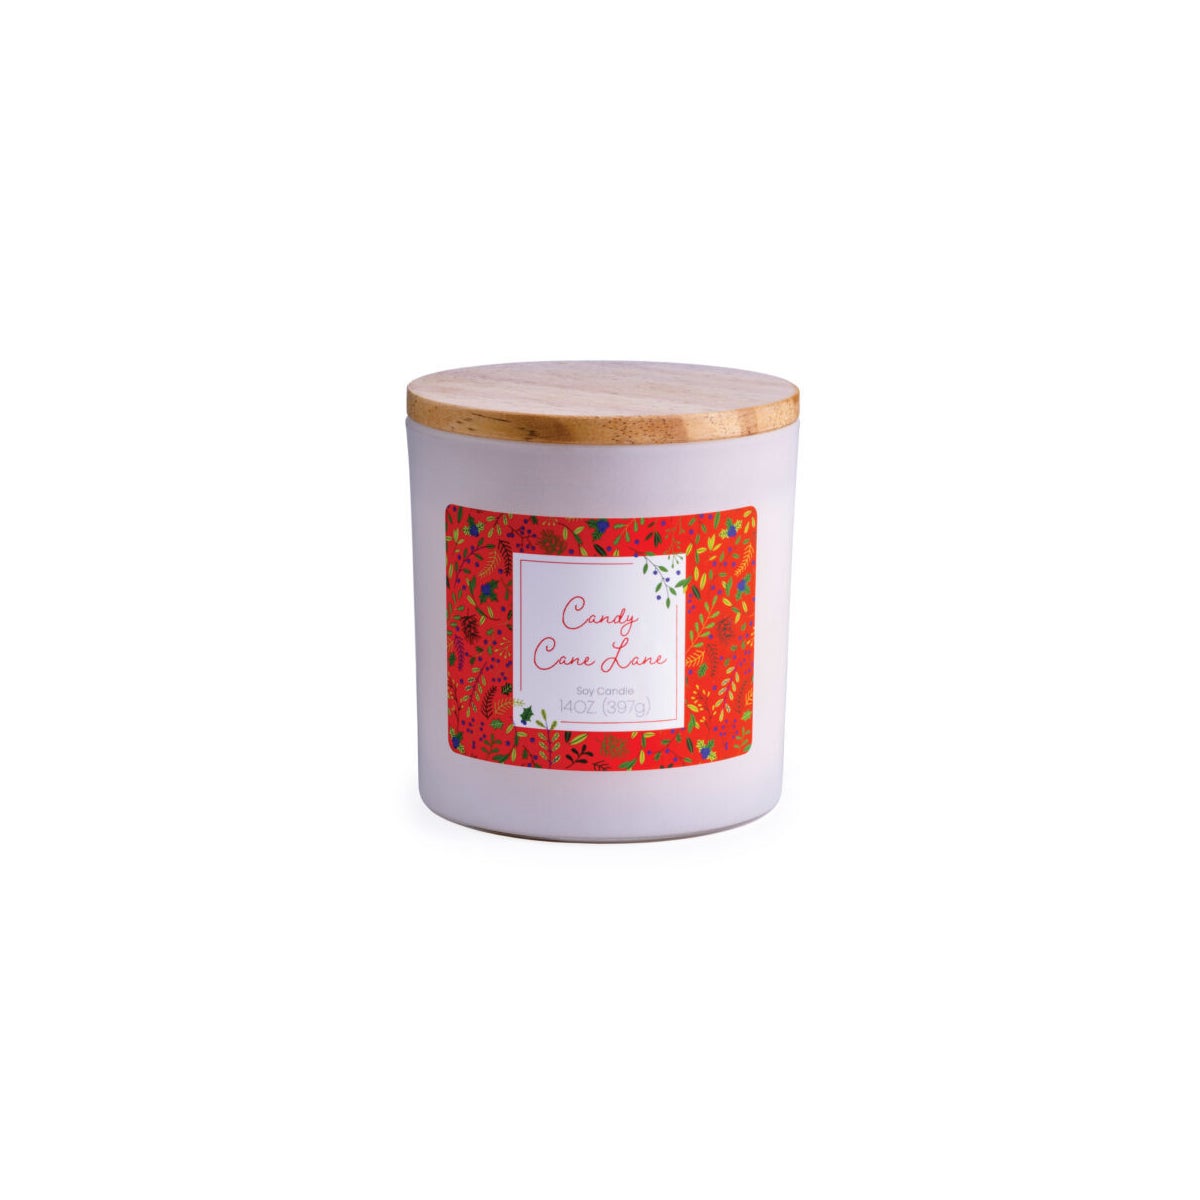 Limited Edition Holiday Candle - Candy Cane Lane